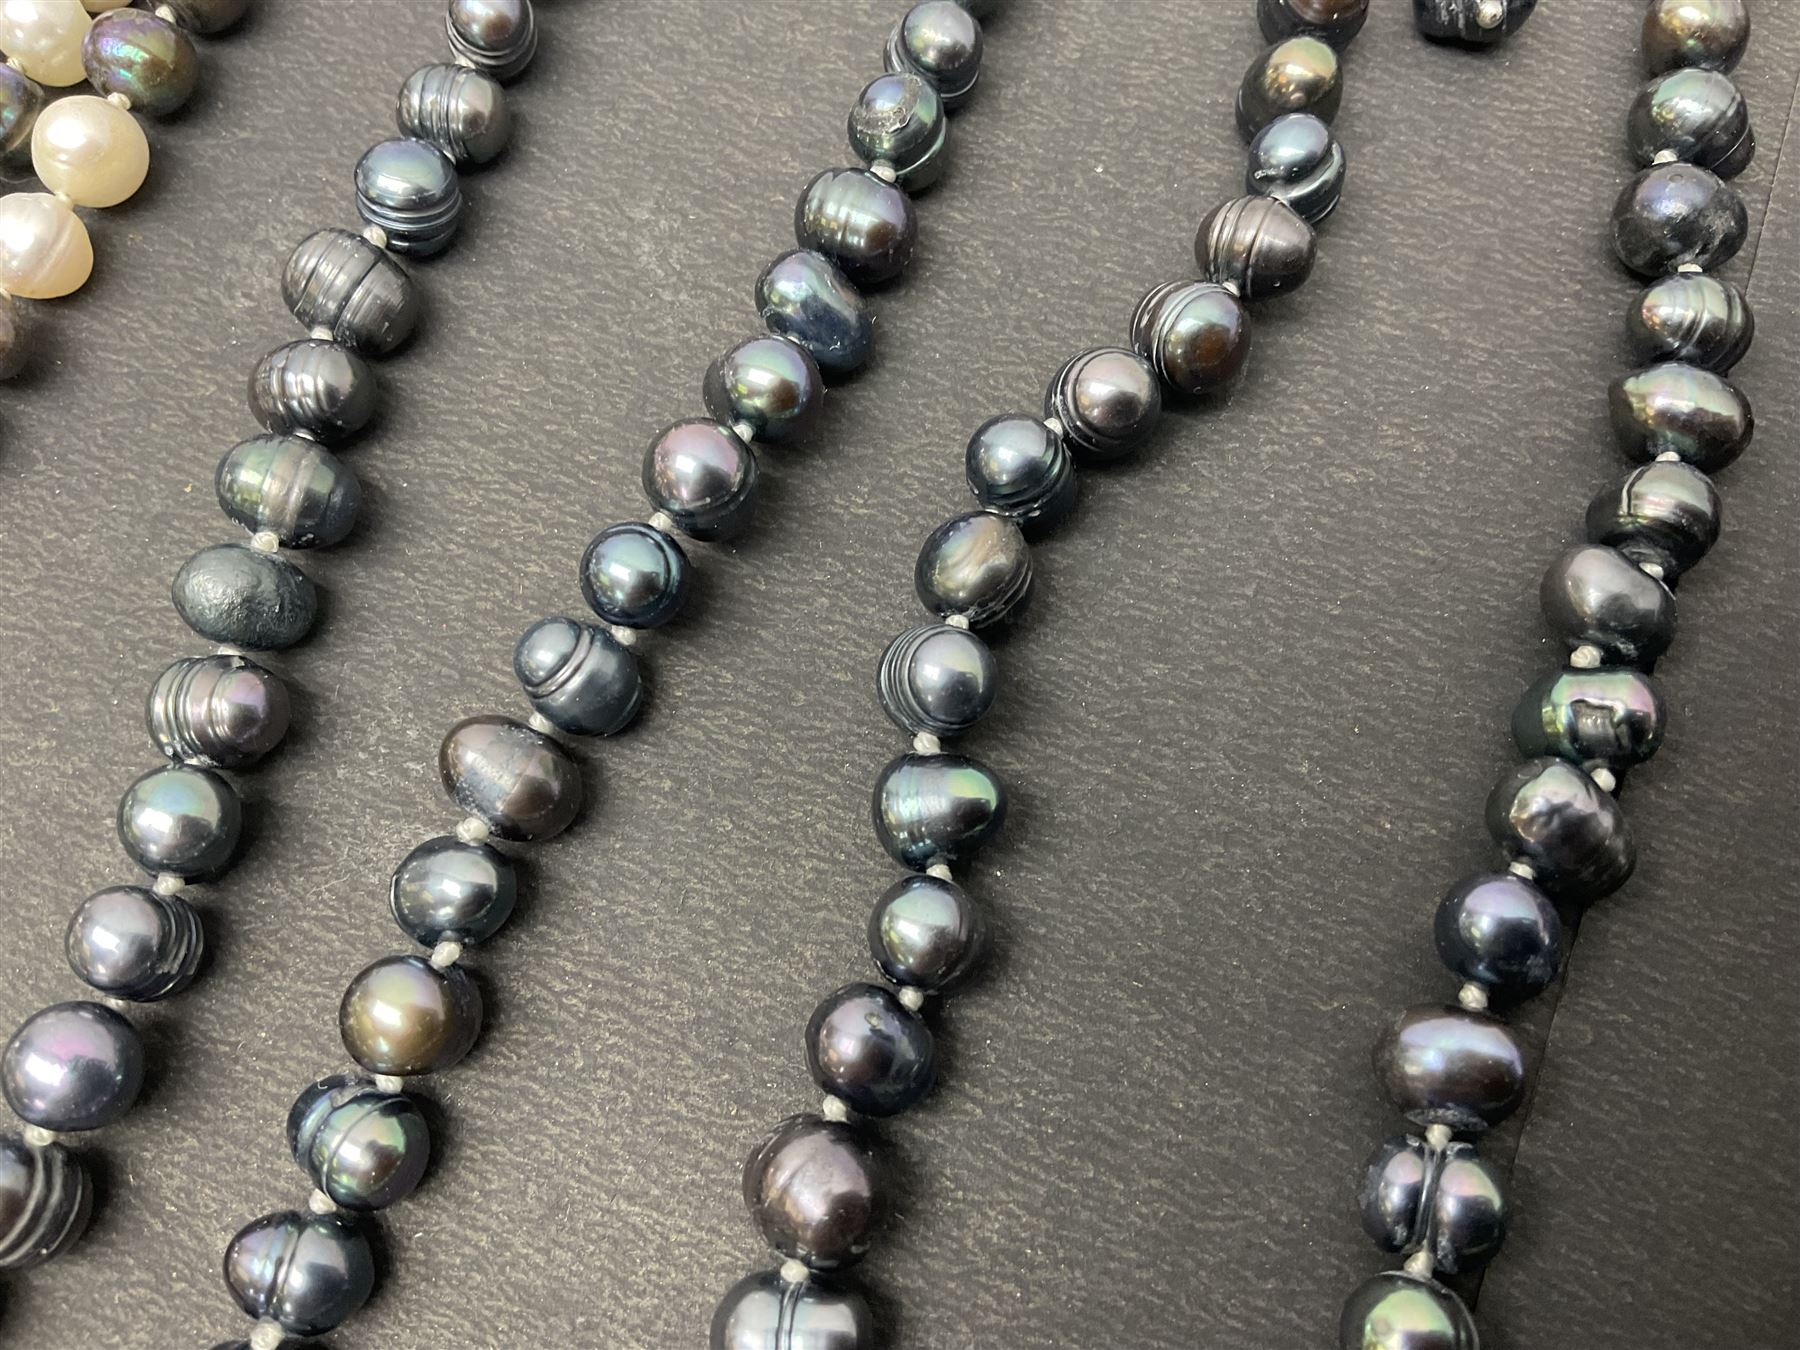 Four fresh water pearl necklaces - Image 31 of 77